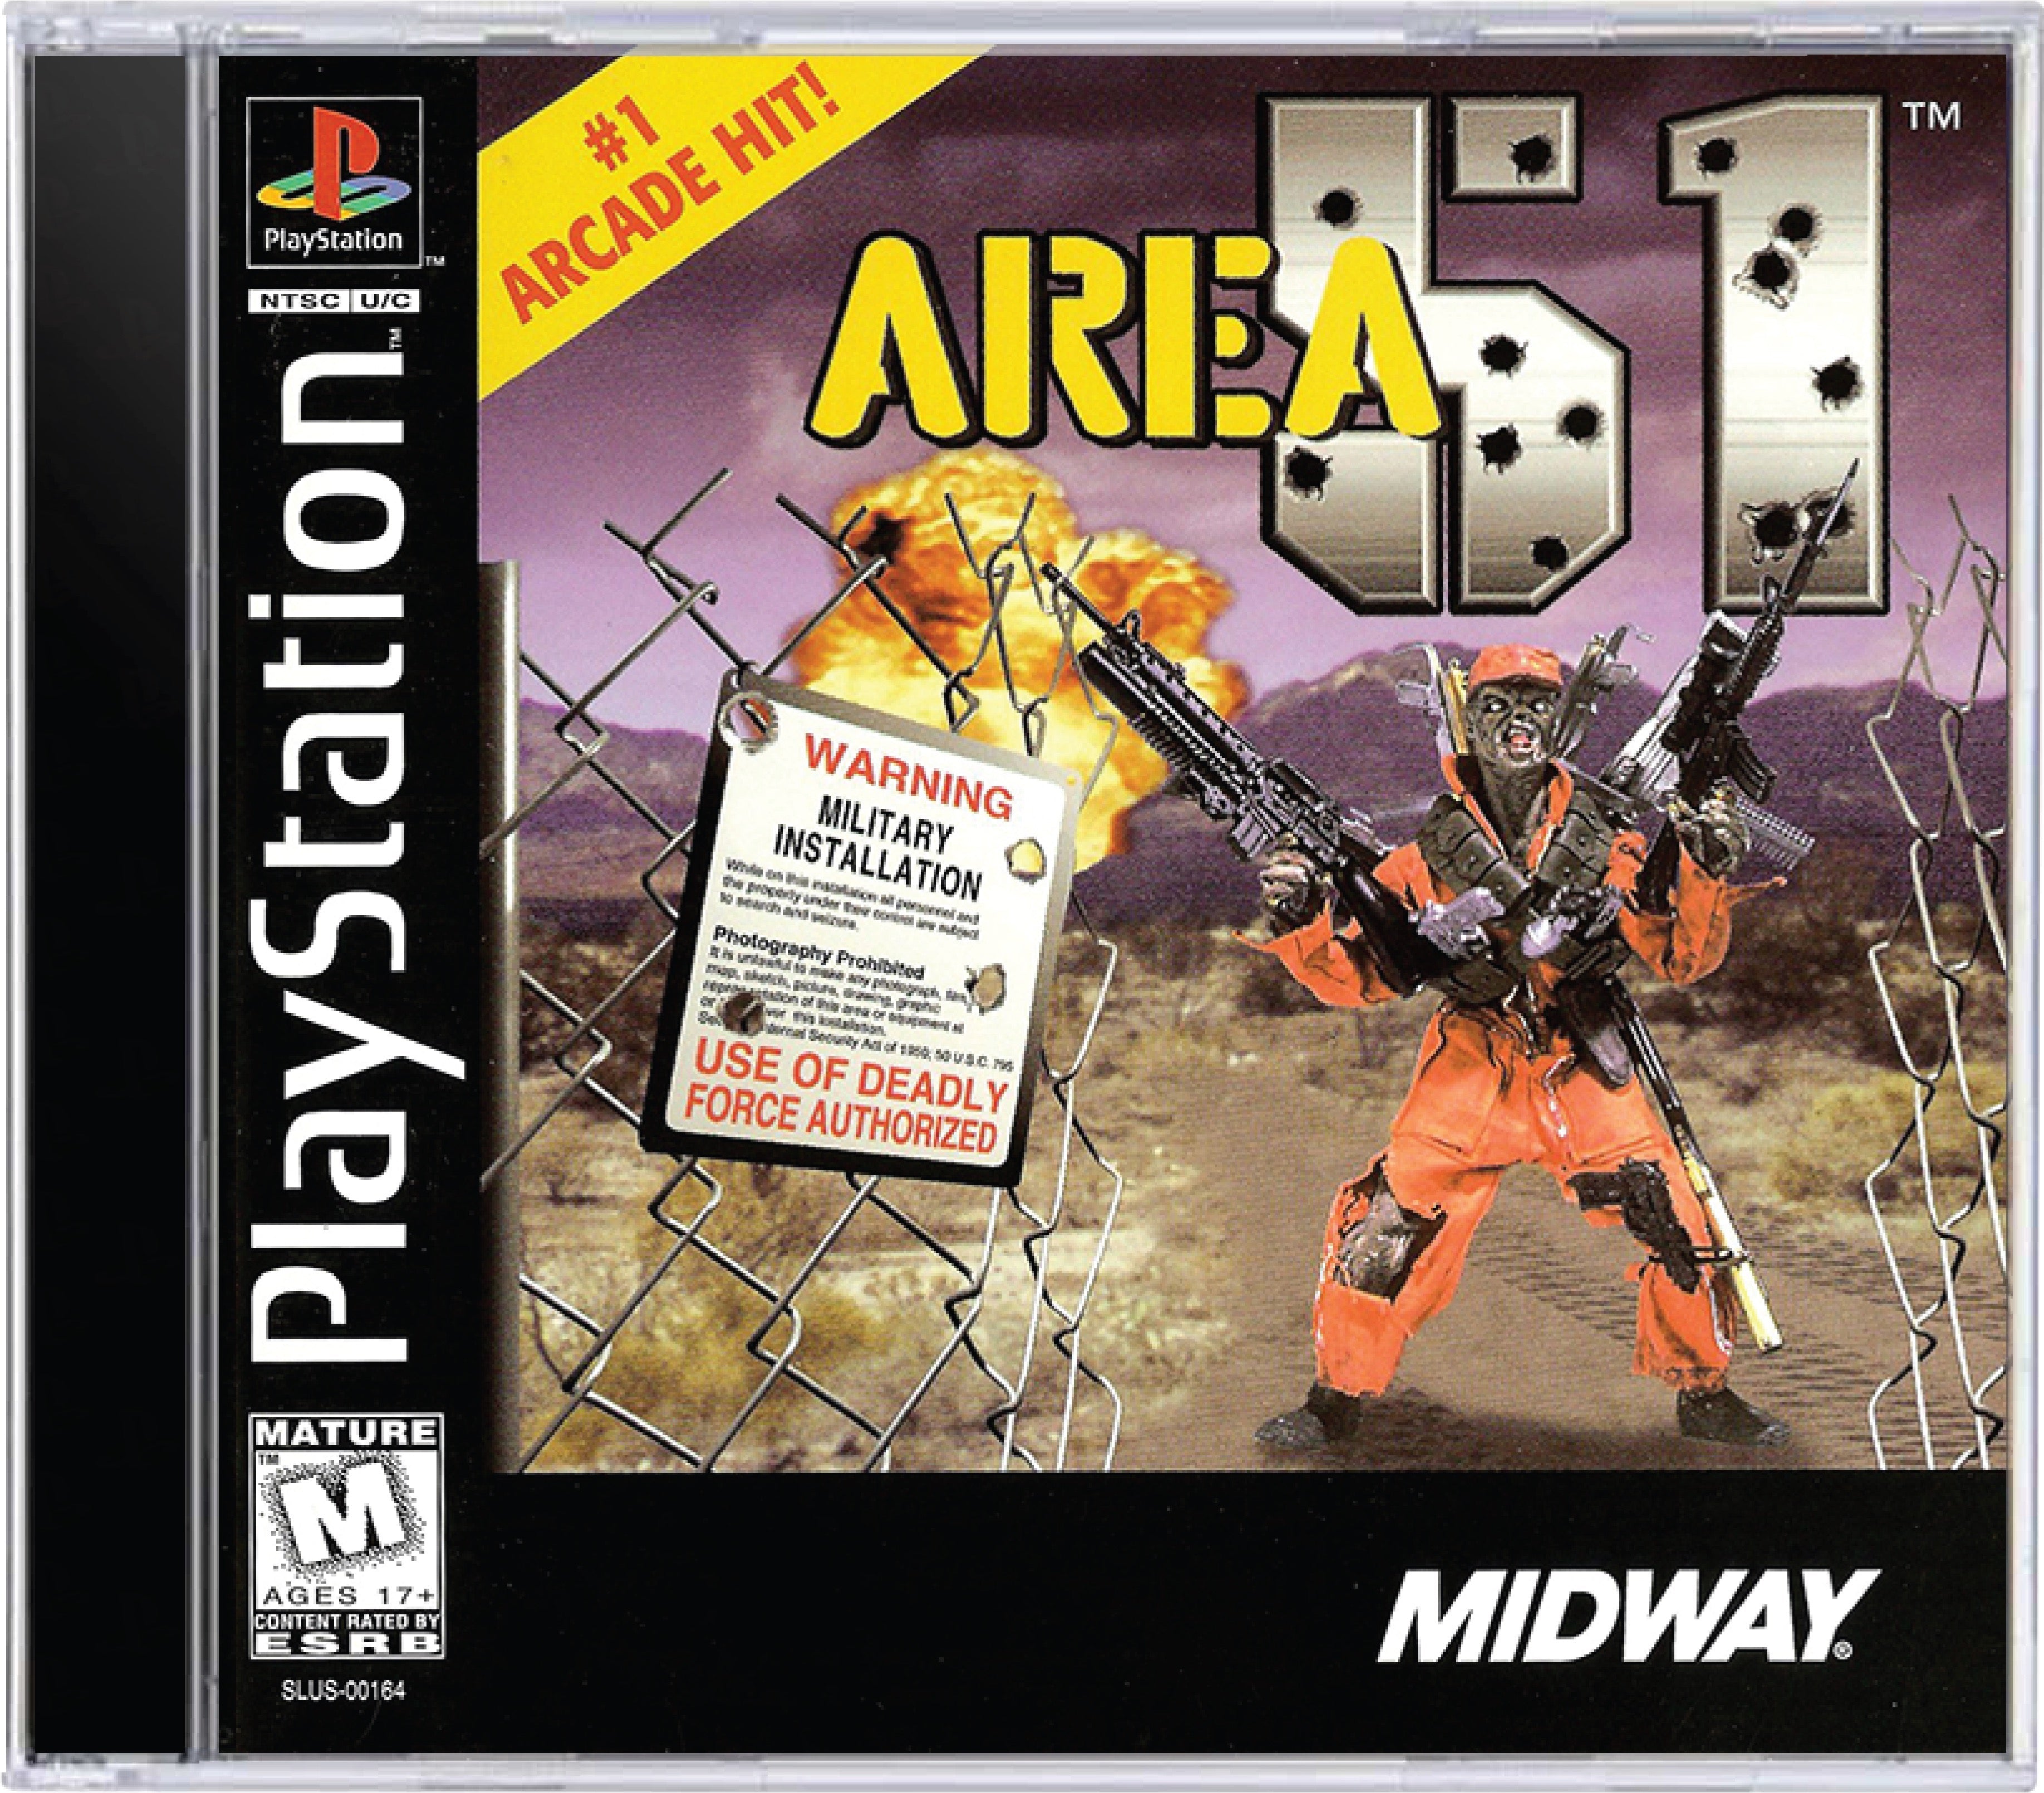 Area 51 Cover Art and Product Photo